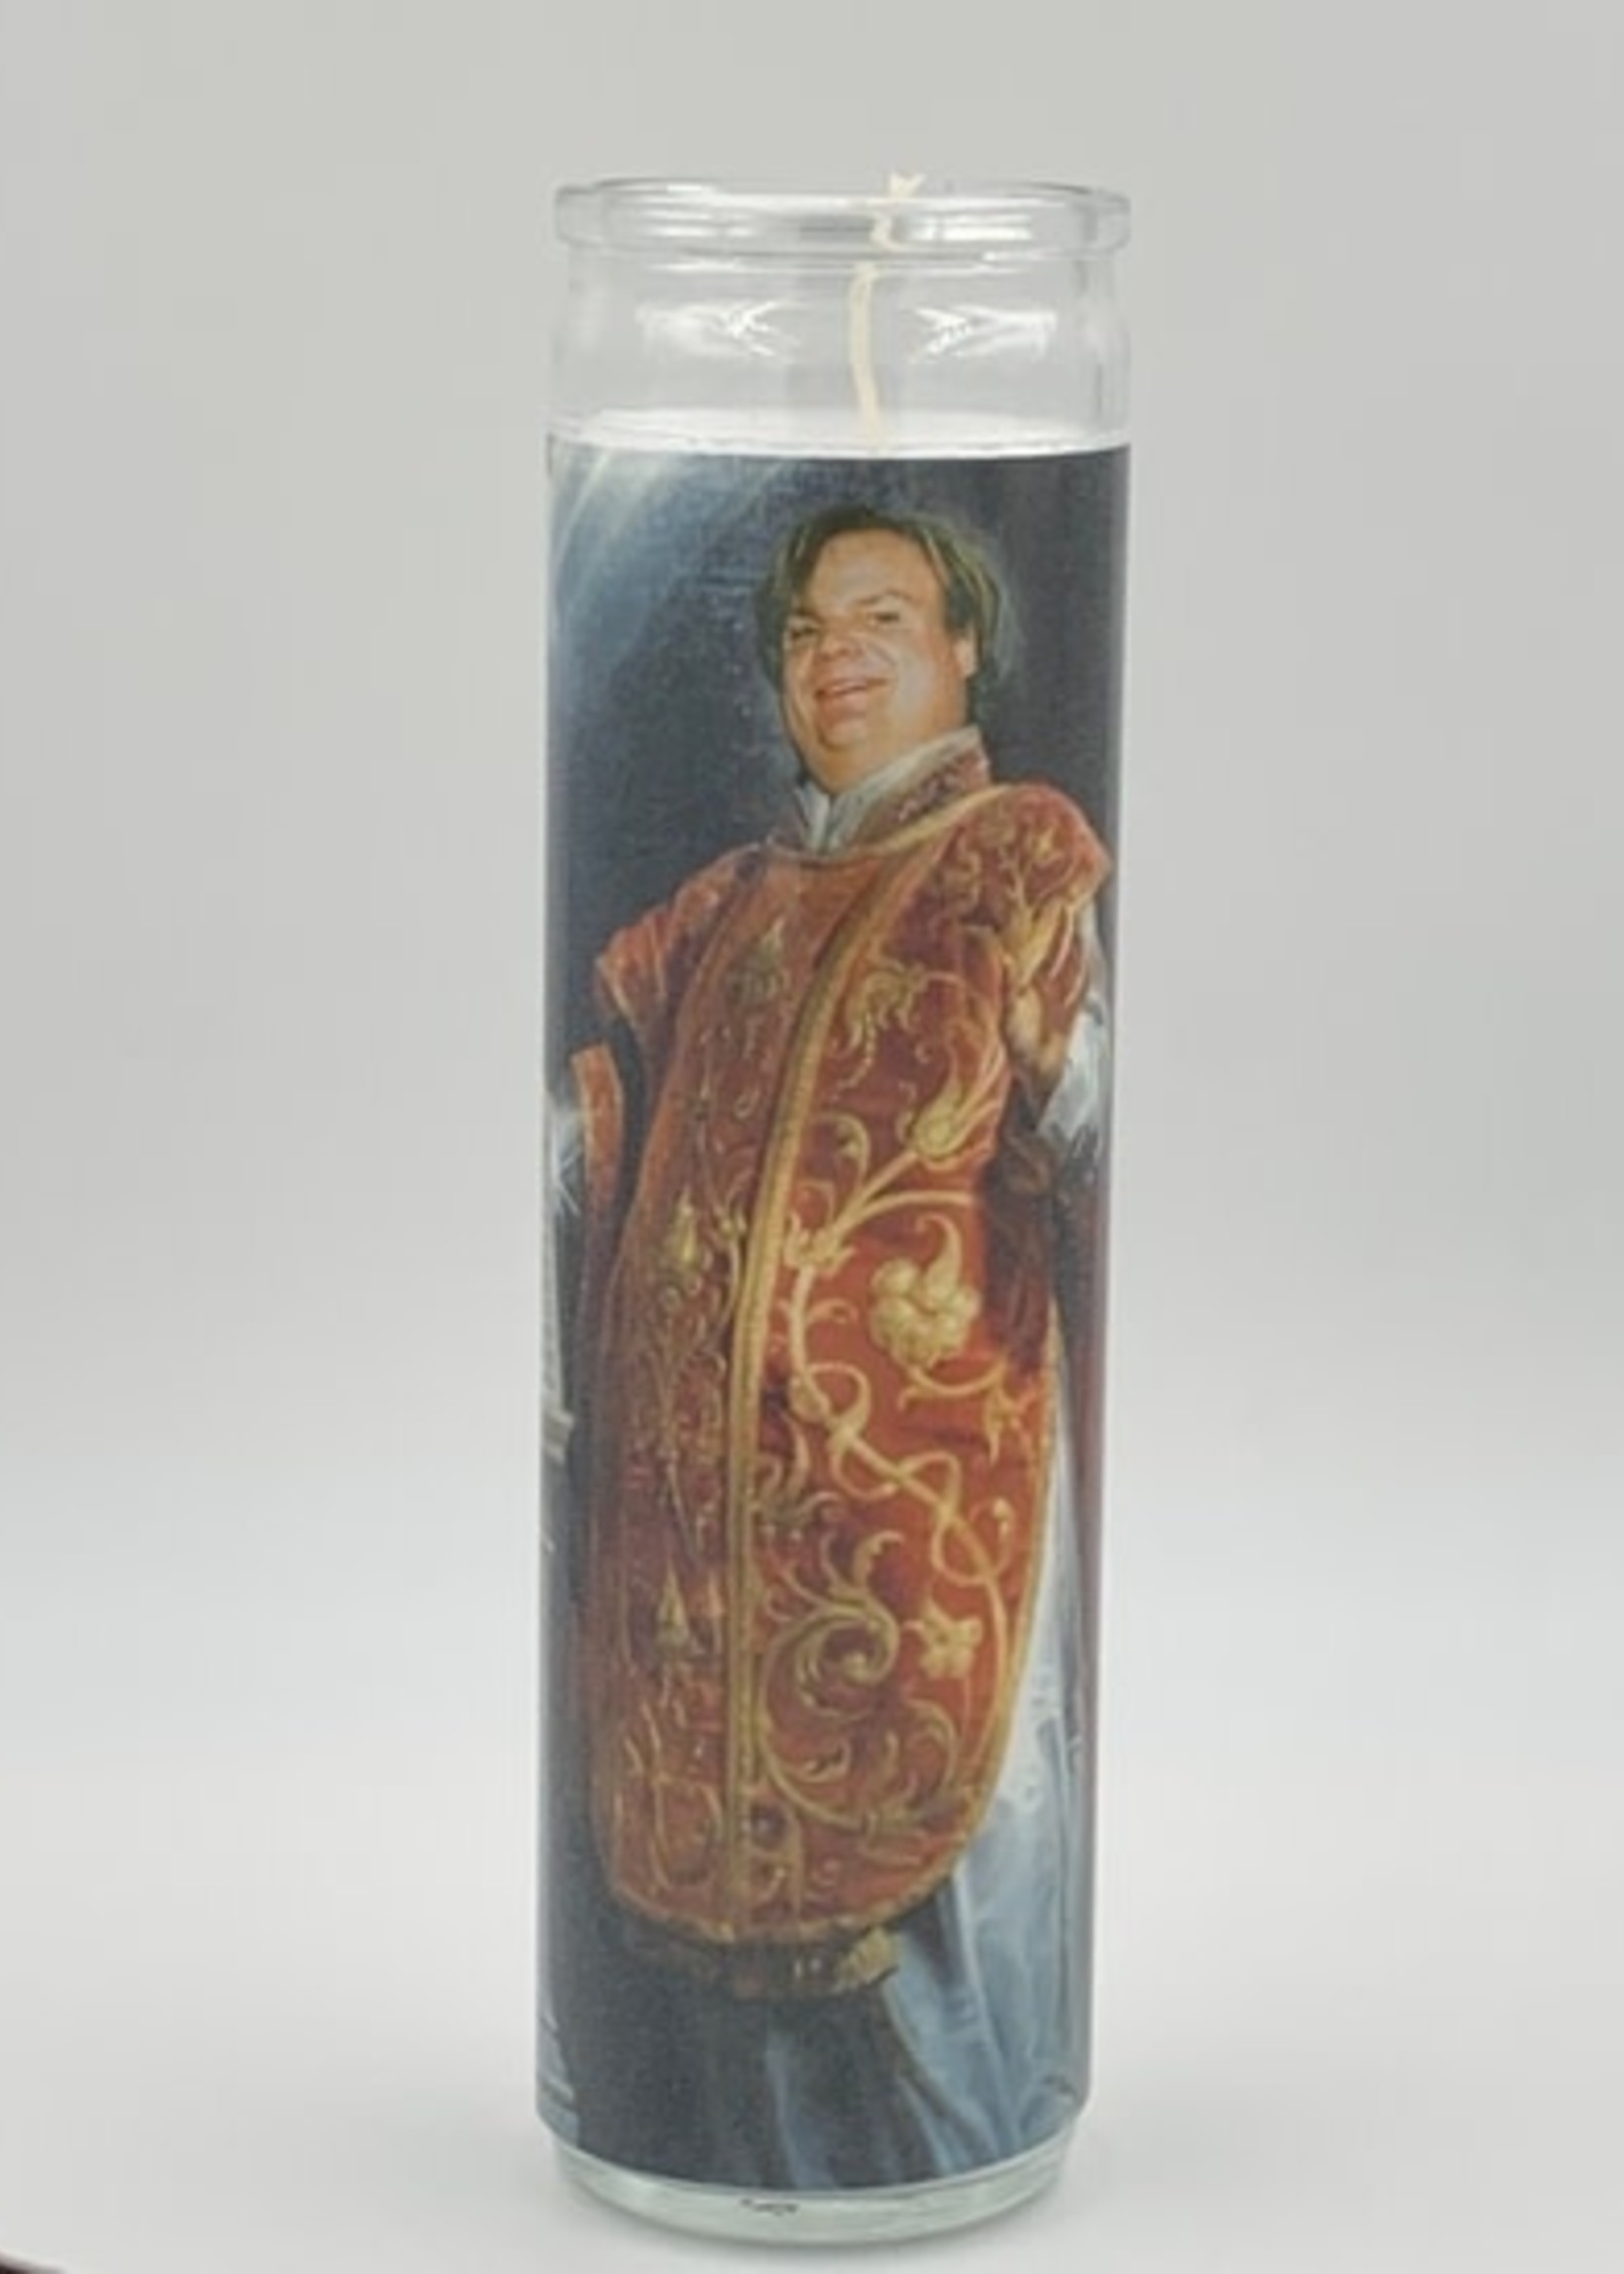 Rustbelt Cooperative Chris Farley Candle